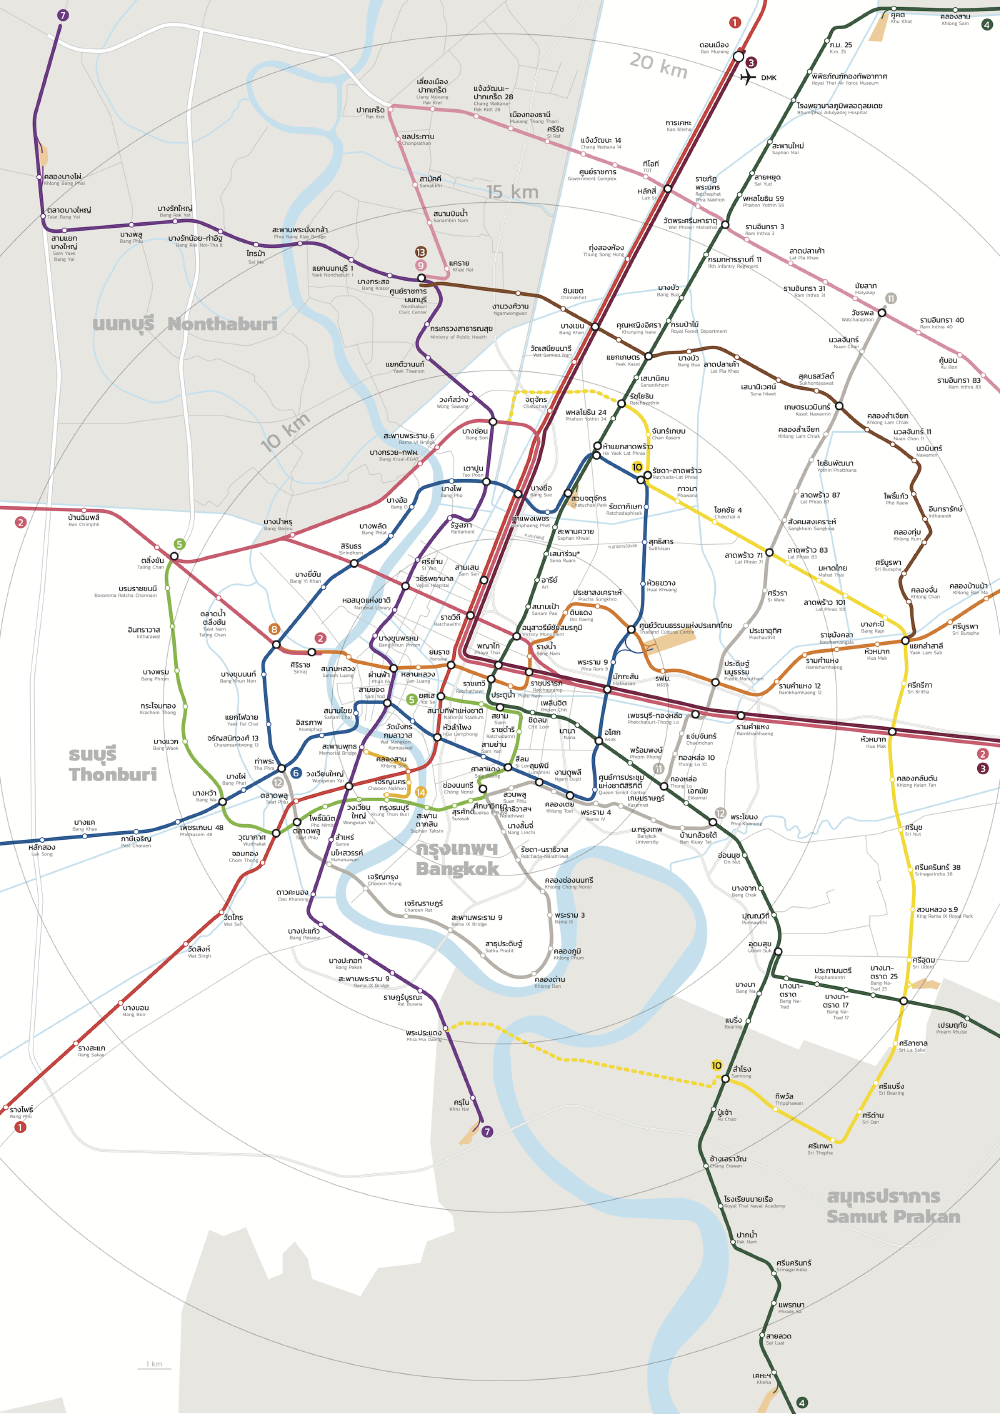 map showing physical location of routes, stations, and depots within a 15-20 km radius from Siam Station